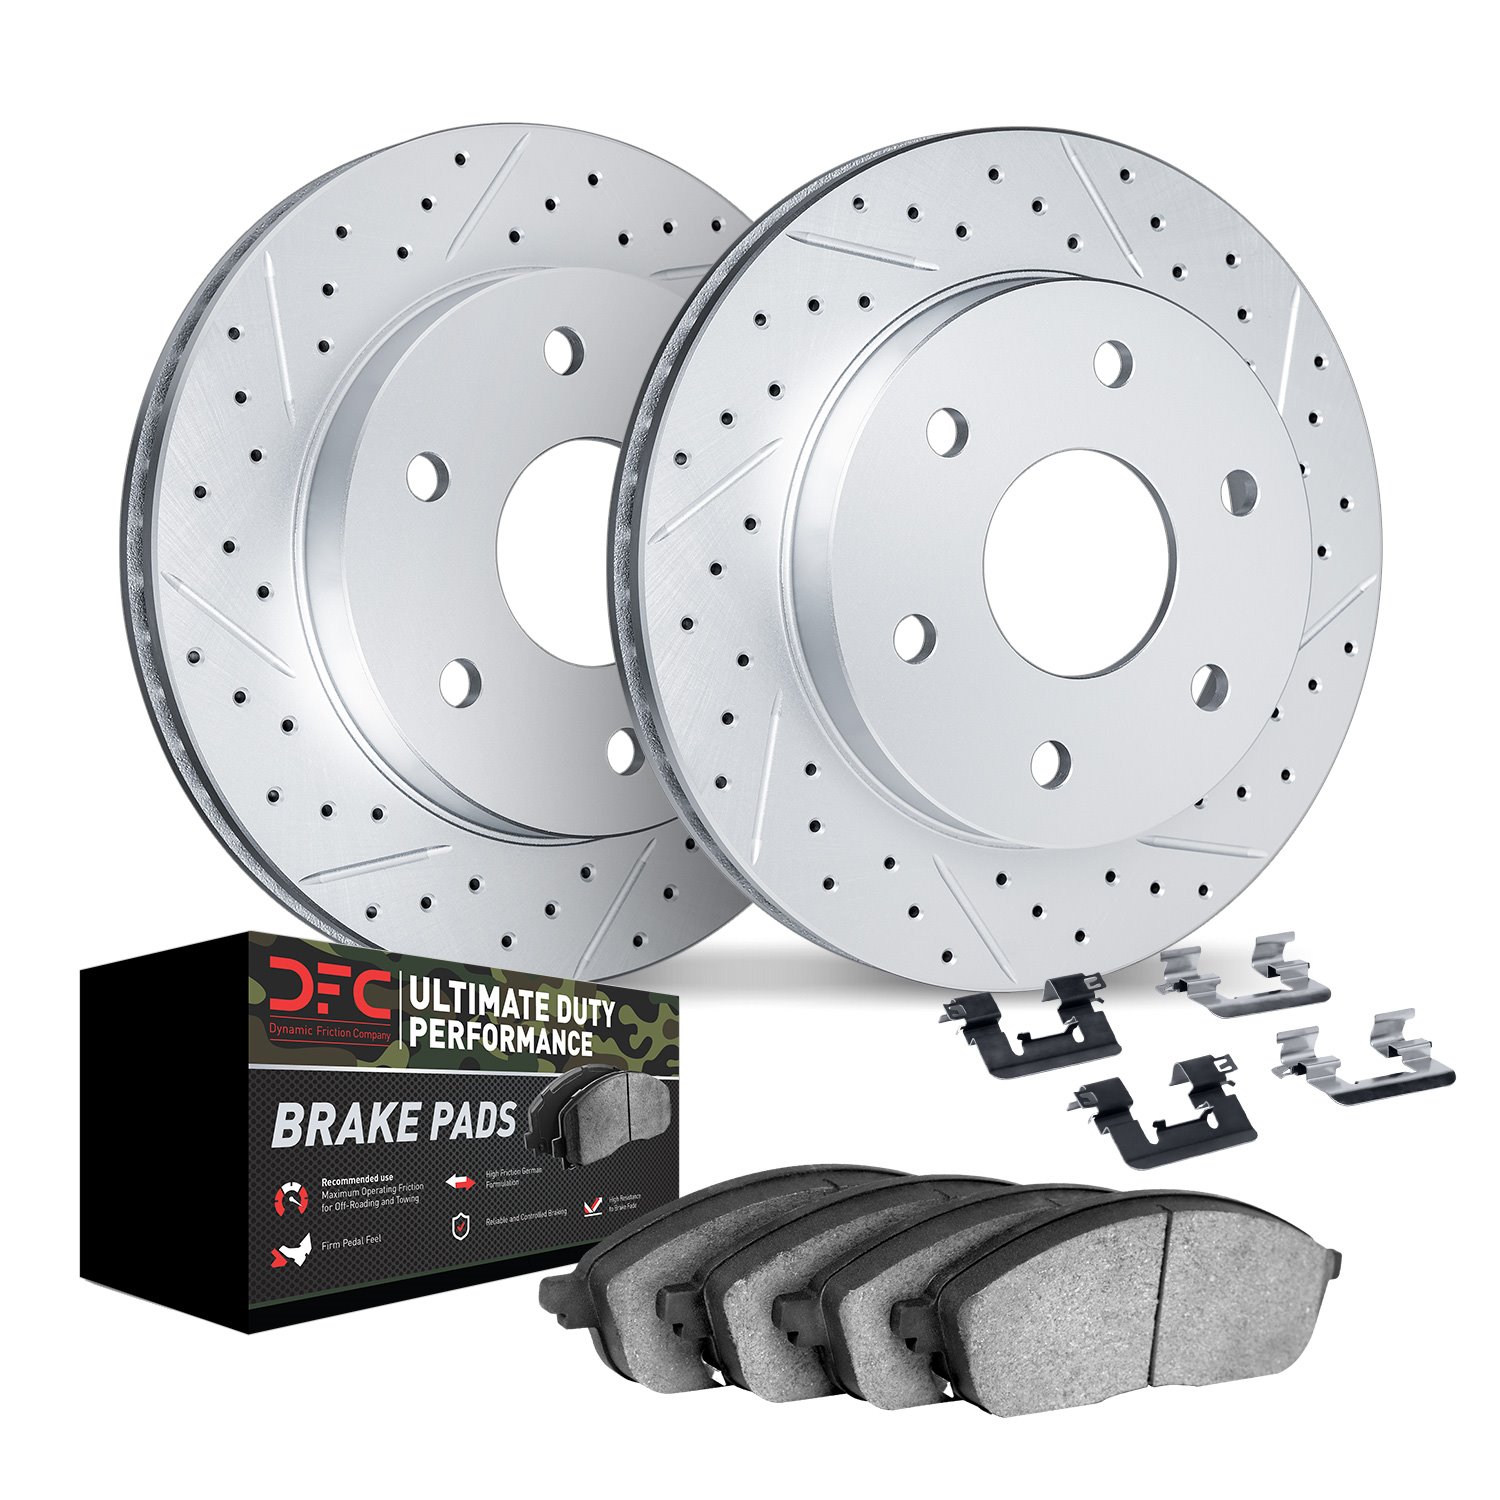 2412-67010 Geoperformance Drilled/Slotted Brake Rotors with Ultimate-Duty Brake Pads Kit & Hardware, Fits Select Infiniti/Nissan